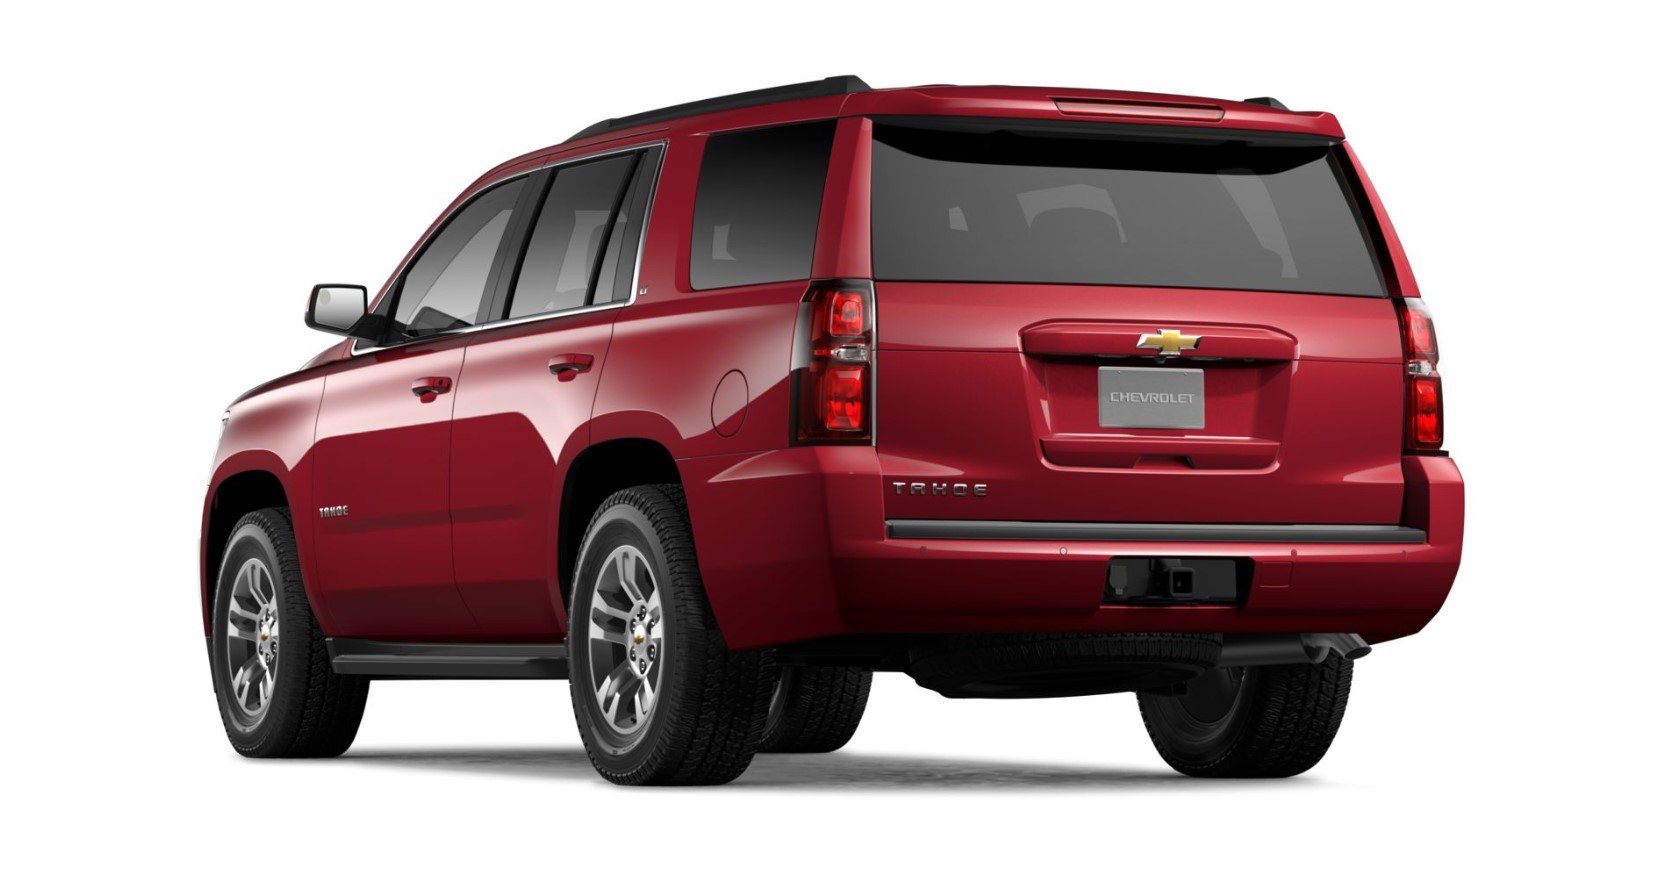 2018 Chevrolet Tahoe LT Rear Red Exterior Picture